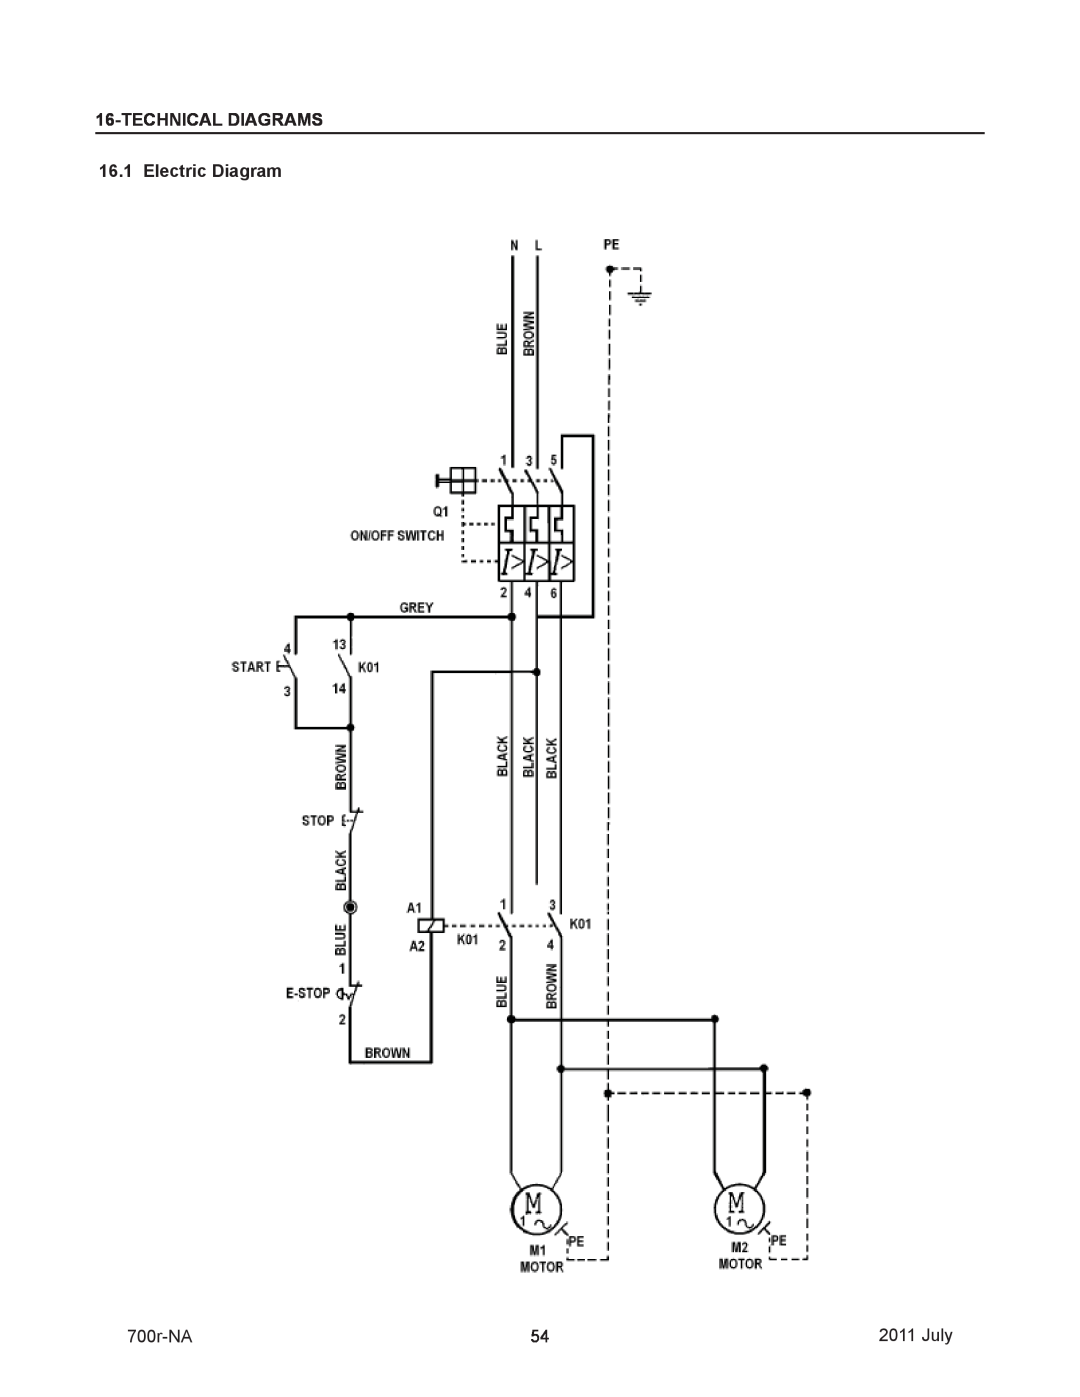 3M 40800 operating instructions TECHNICALDIAGRAMS 16.1 Electric Diagram, 700r-NA, July 